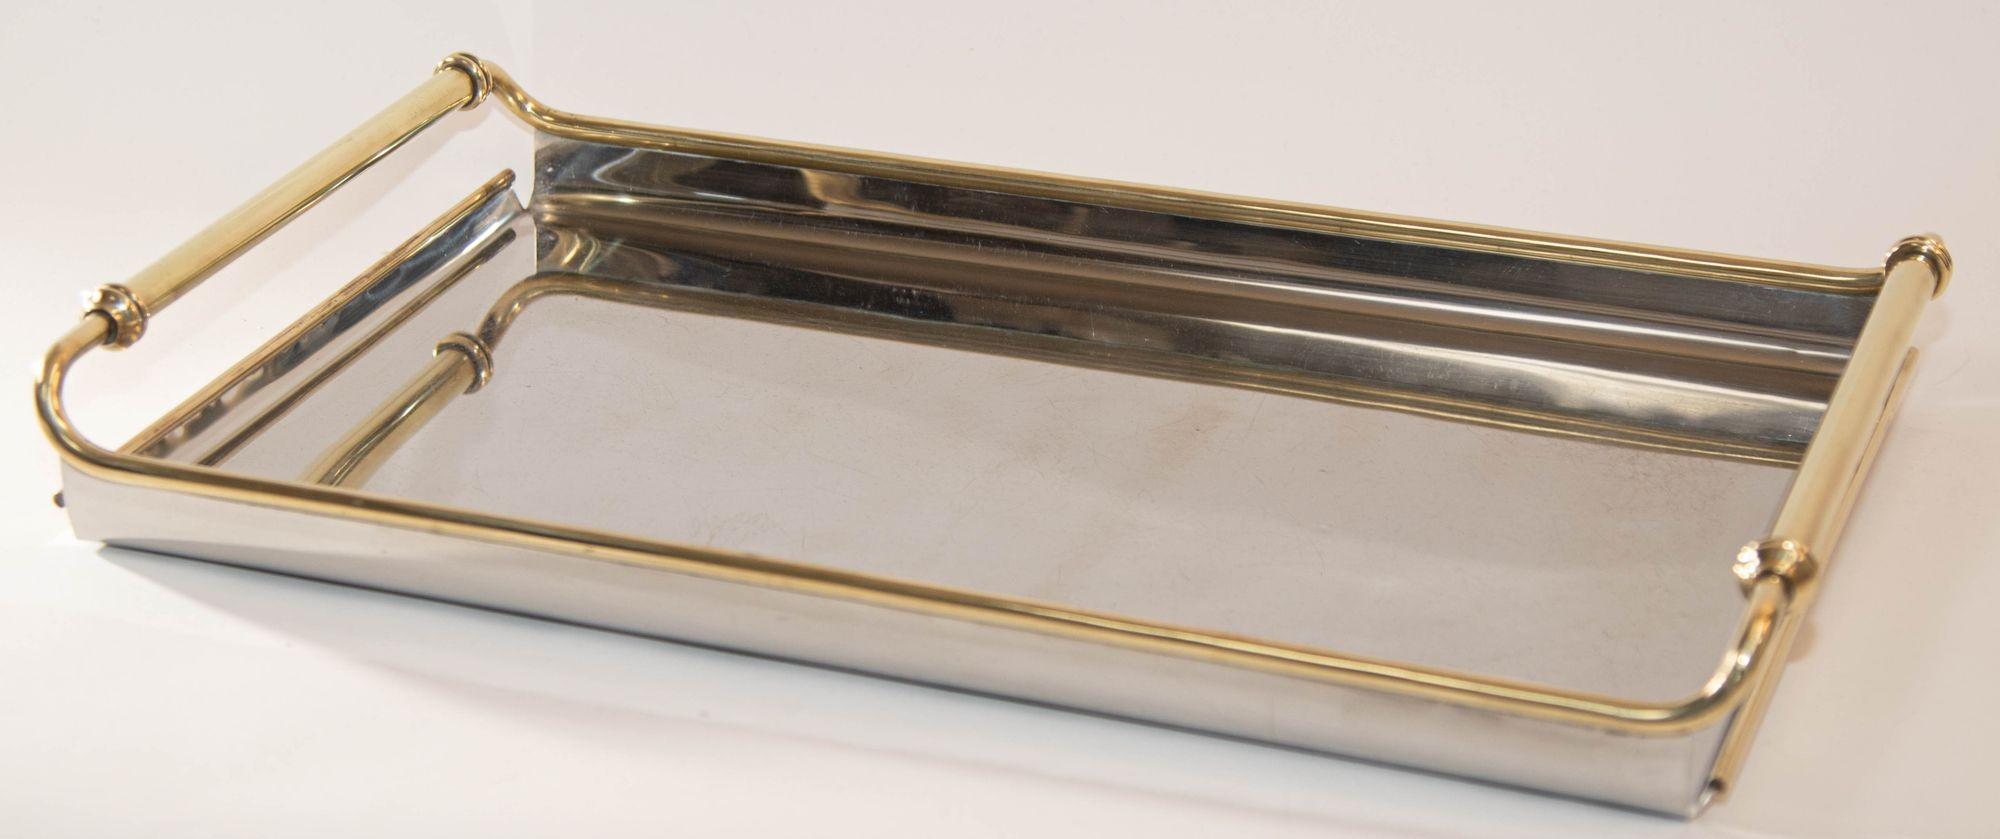 Hand-Crafted 1950s Art Deco Metal Tray Chrome Mirrored with Brass Handles